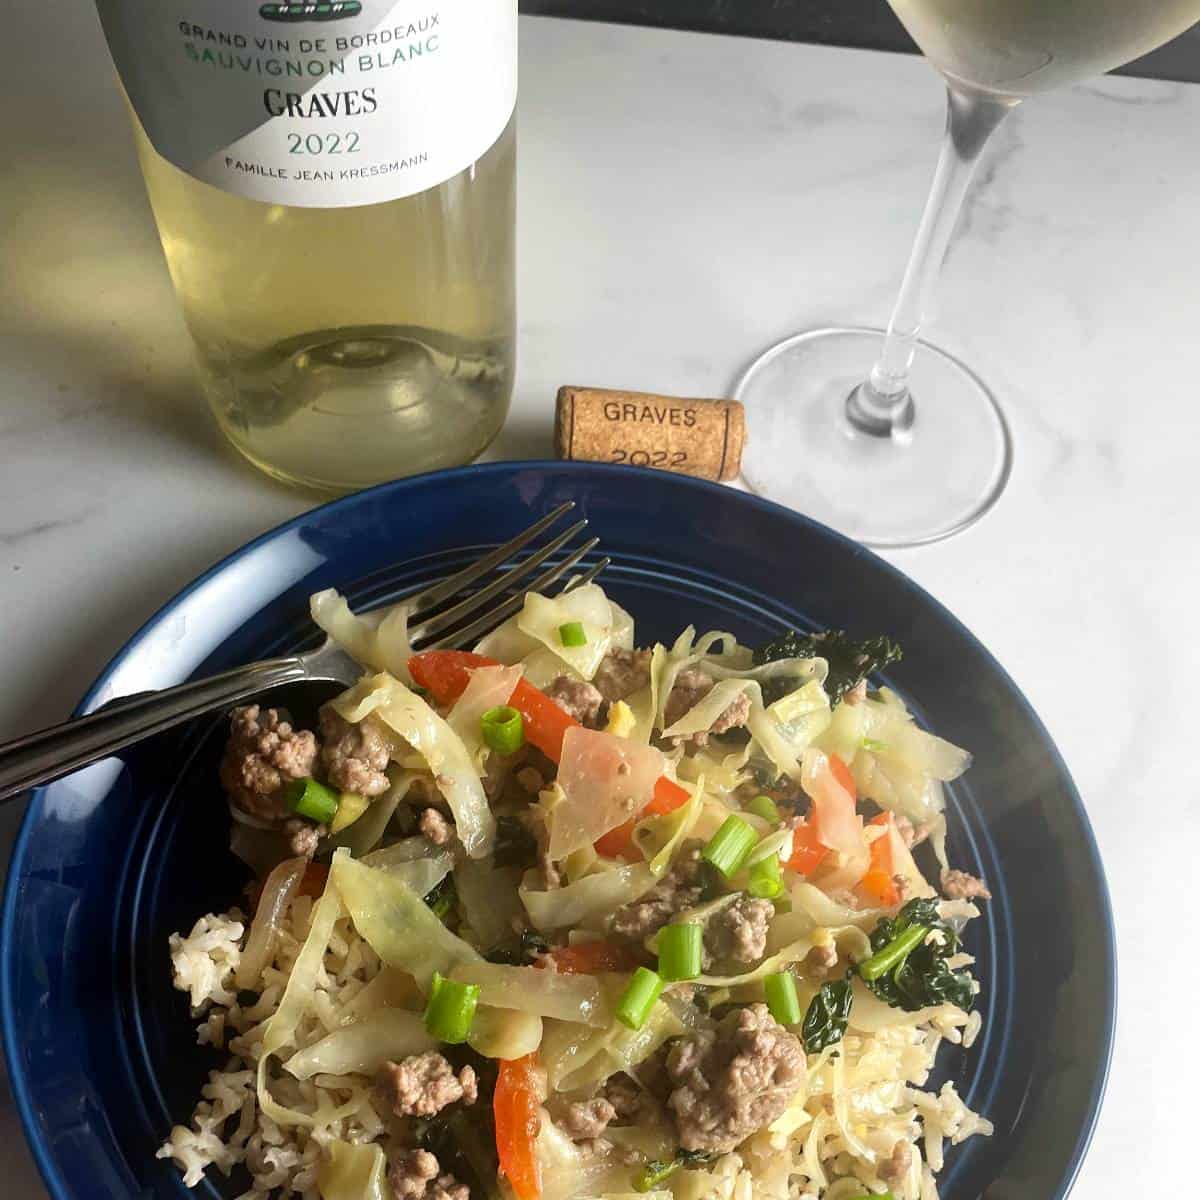 ground pork and cabbage stir-fry on a blue plate, served with white wine in the background.